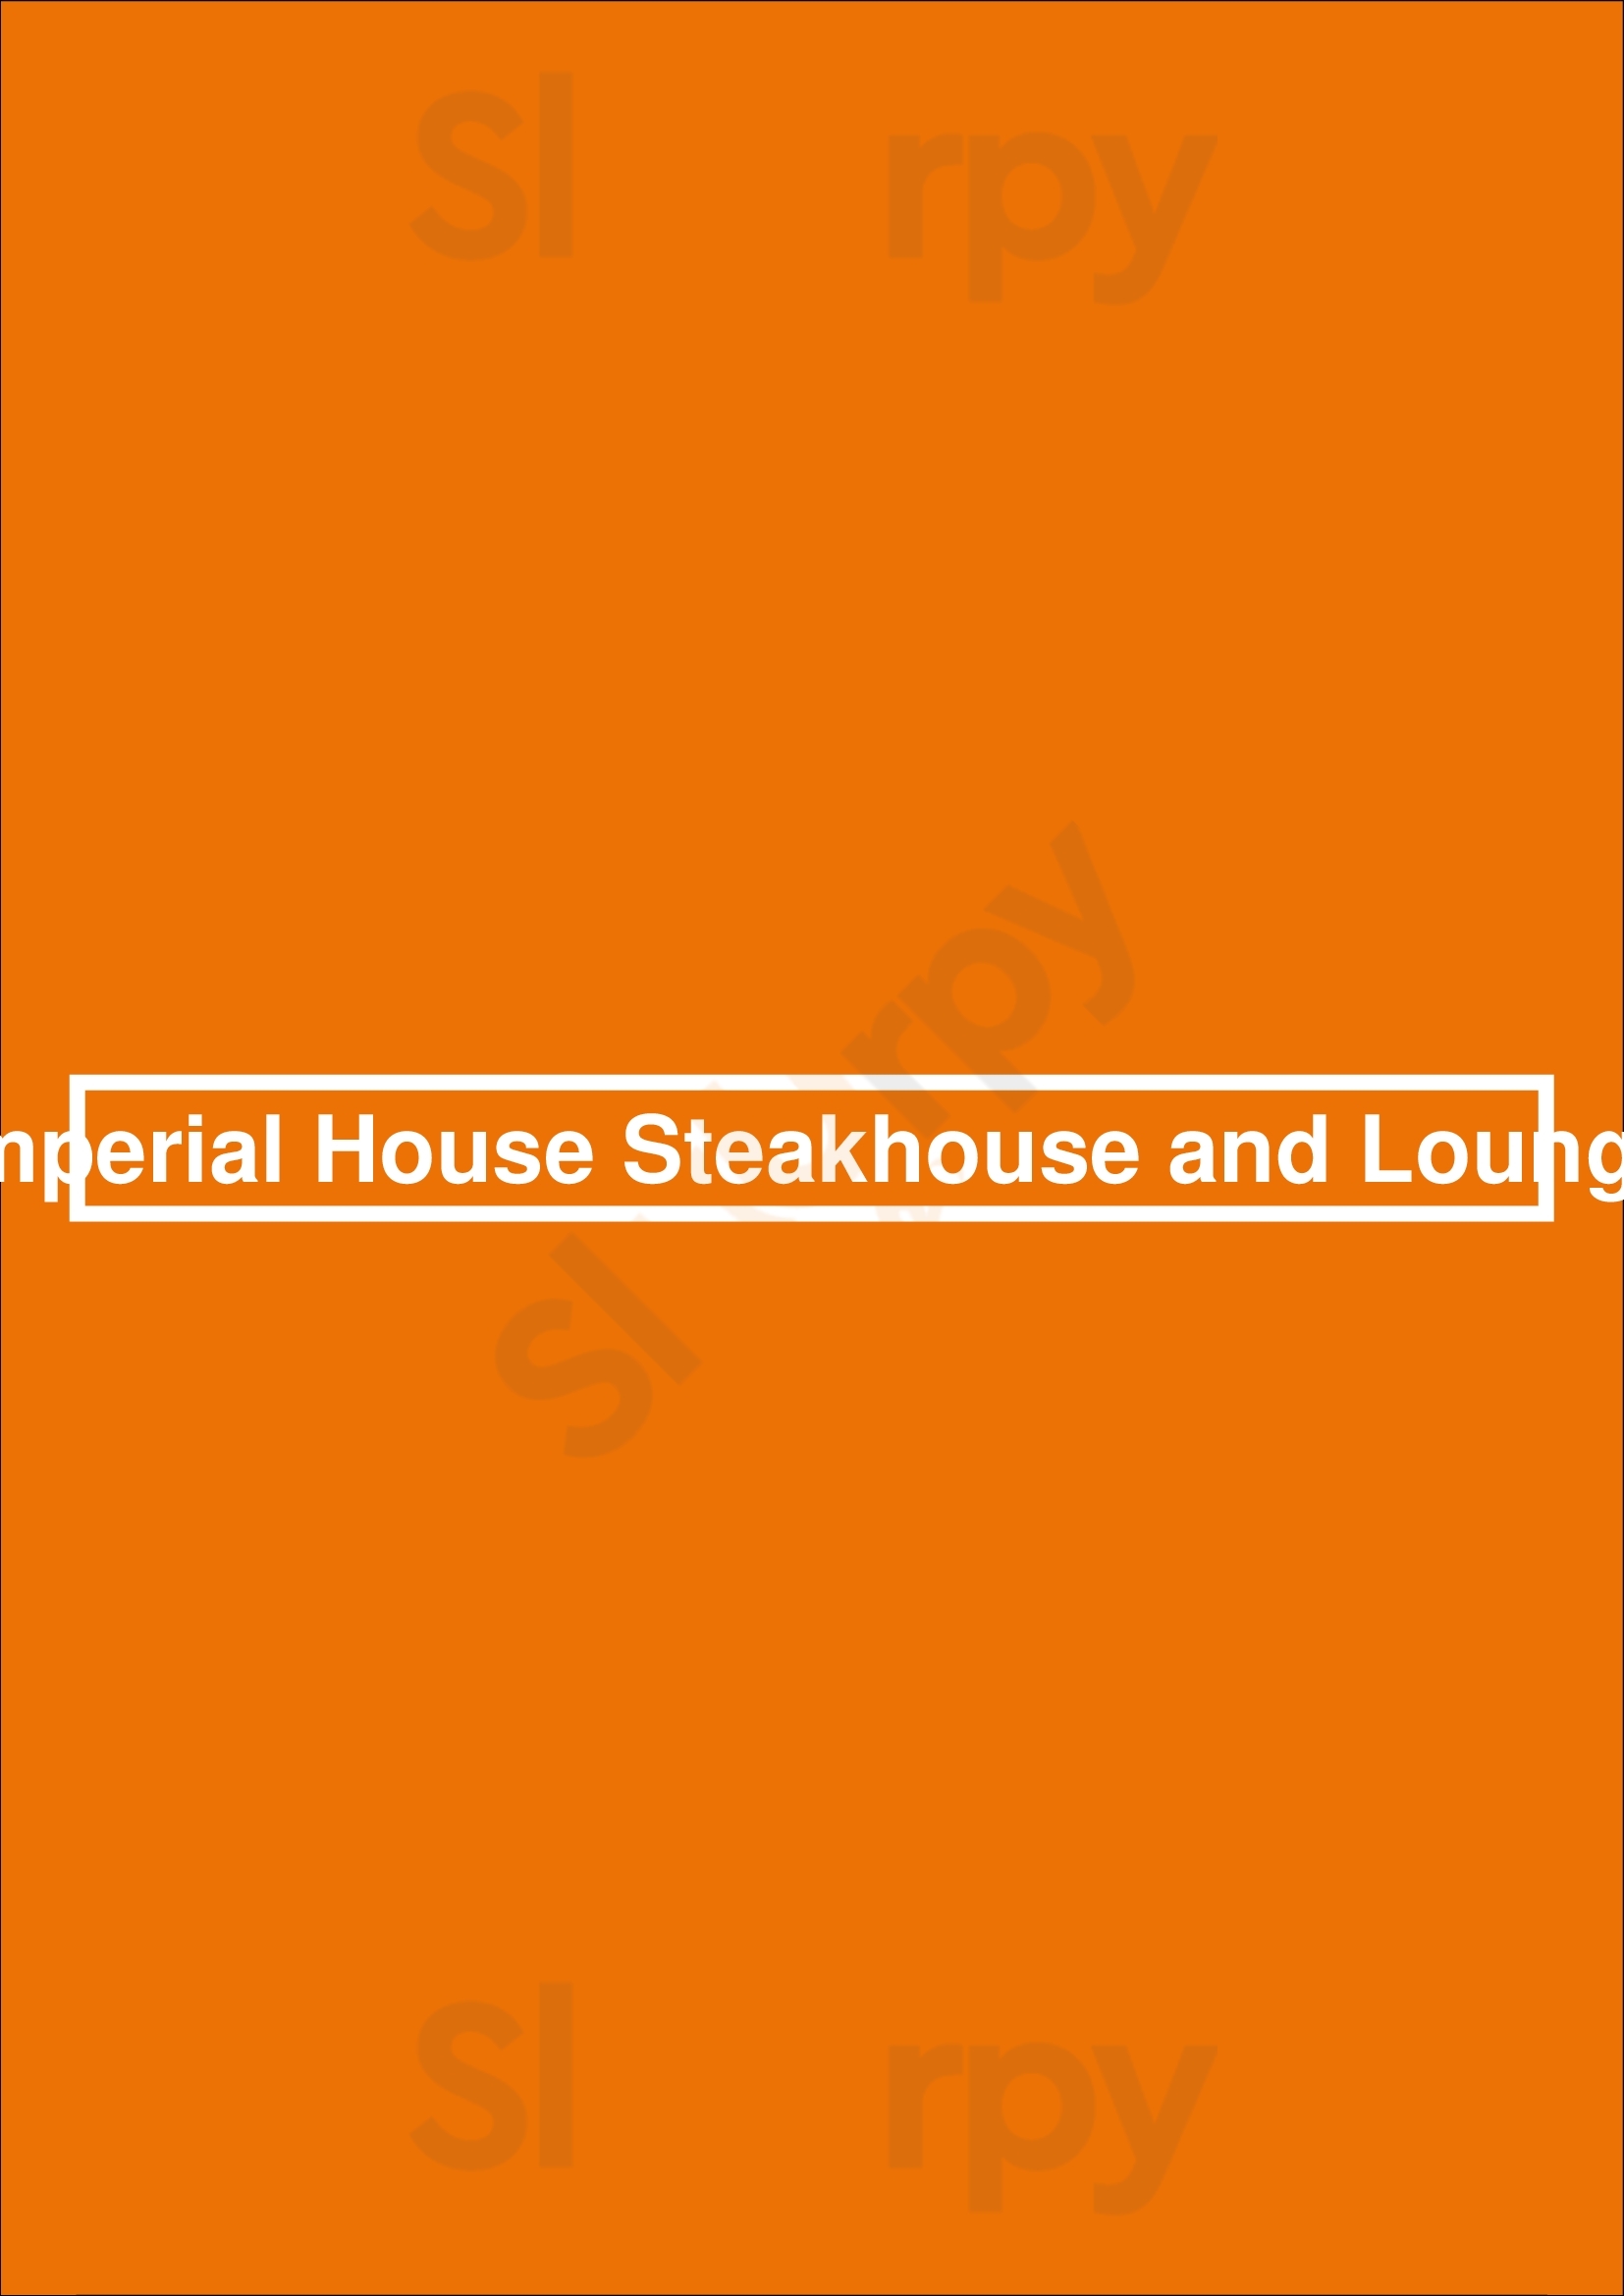 Imperial House Steakhouse And Lounge San Diego Menu - 1